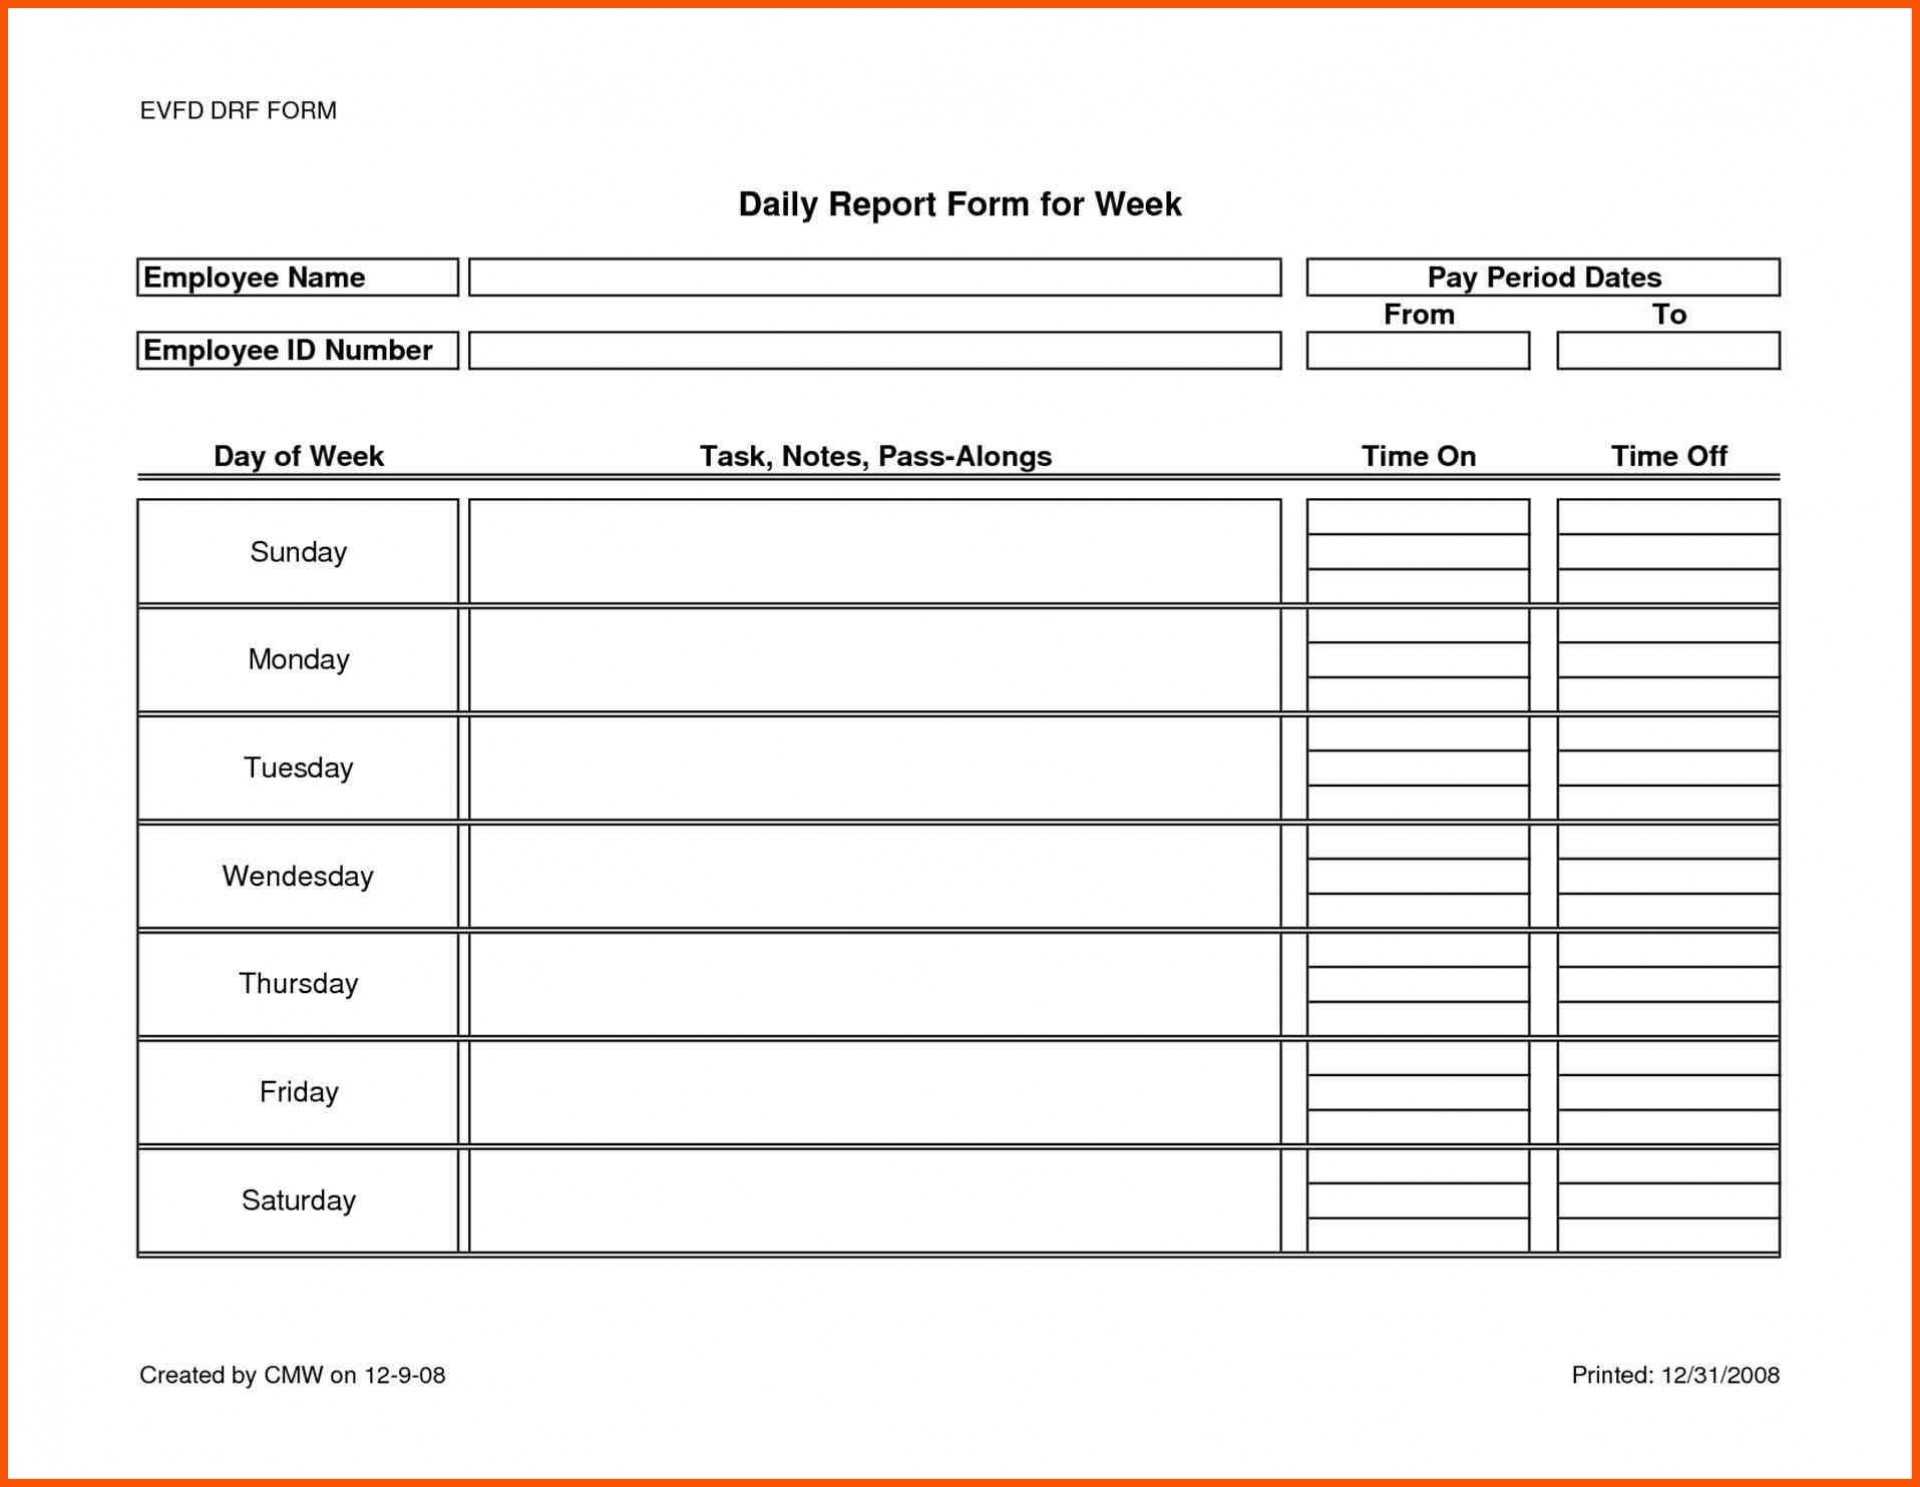 004 Daily Activity Report Template Weekly Fantastic Ideas Intended For Daily Activity Report Template